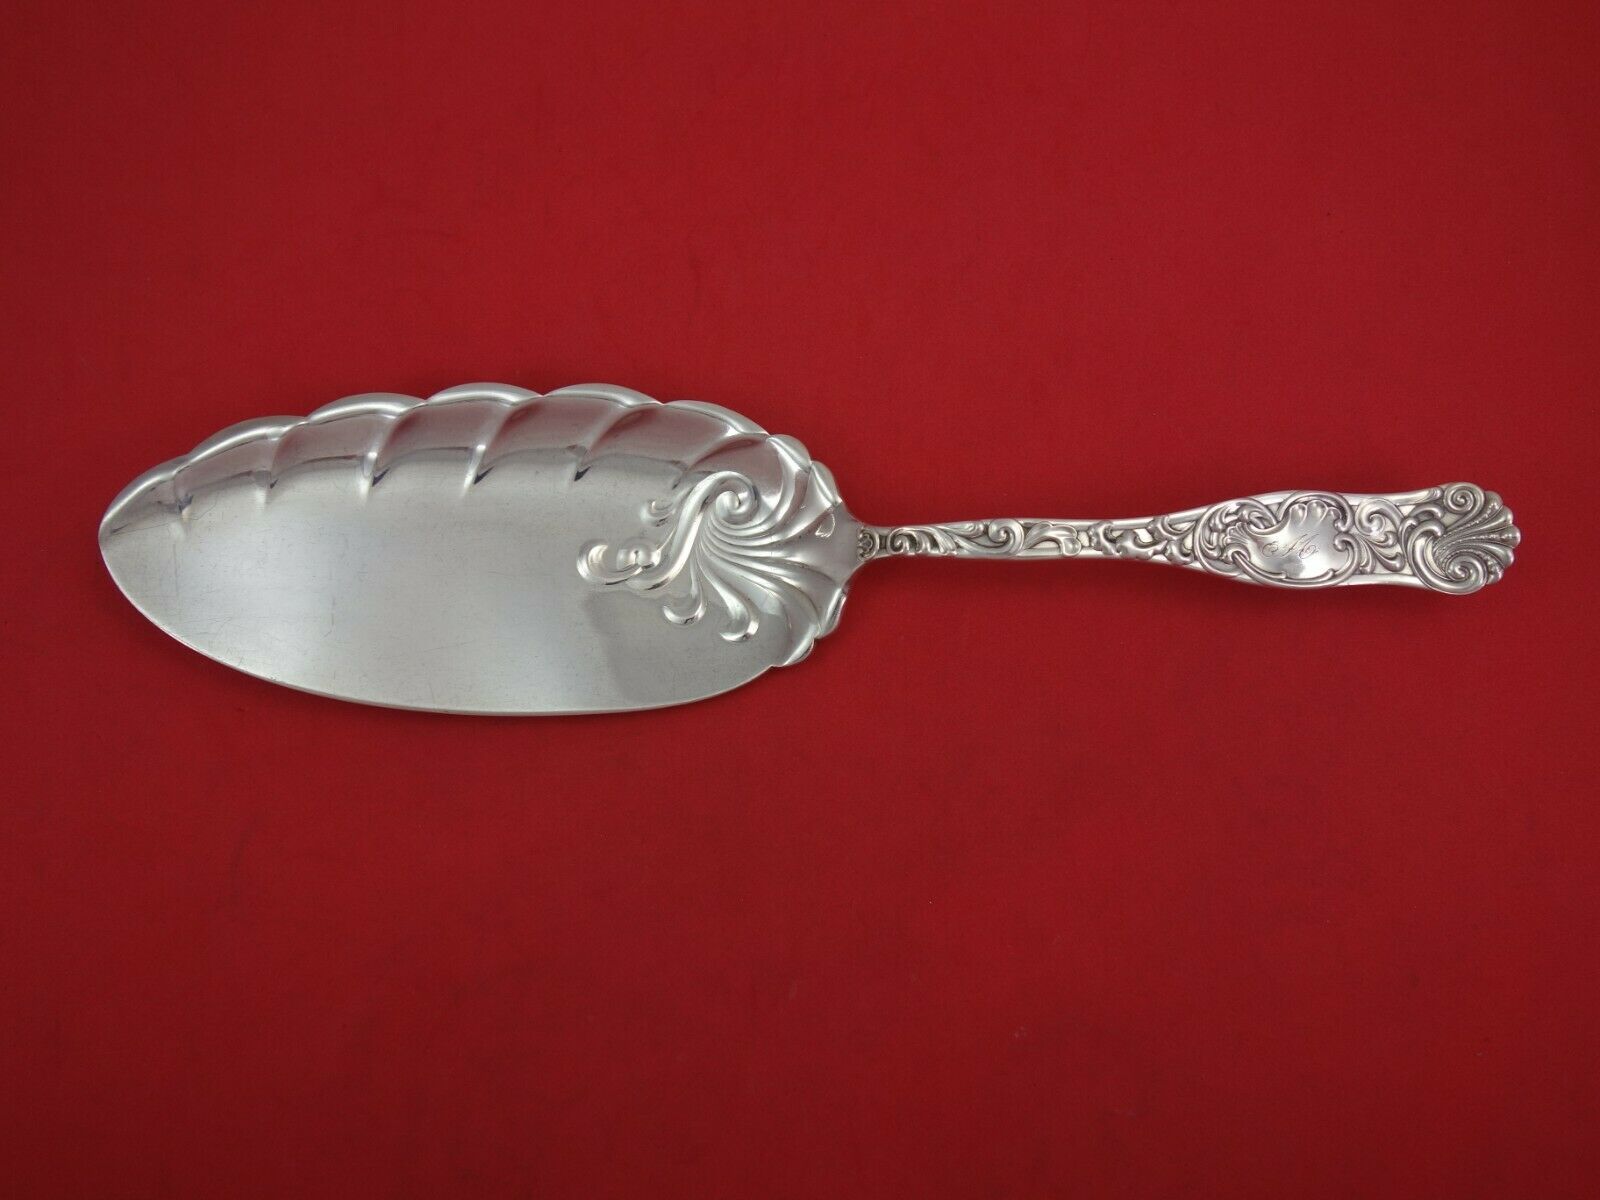 Primary image for Diane by Towle Sterling Silver Fish Server All Sterling Flat Handle 11 3/4"